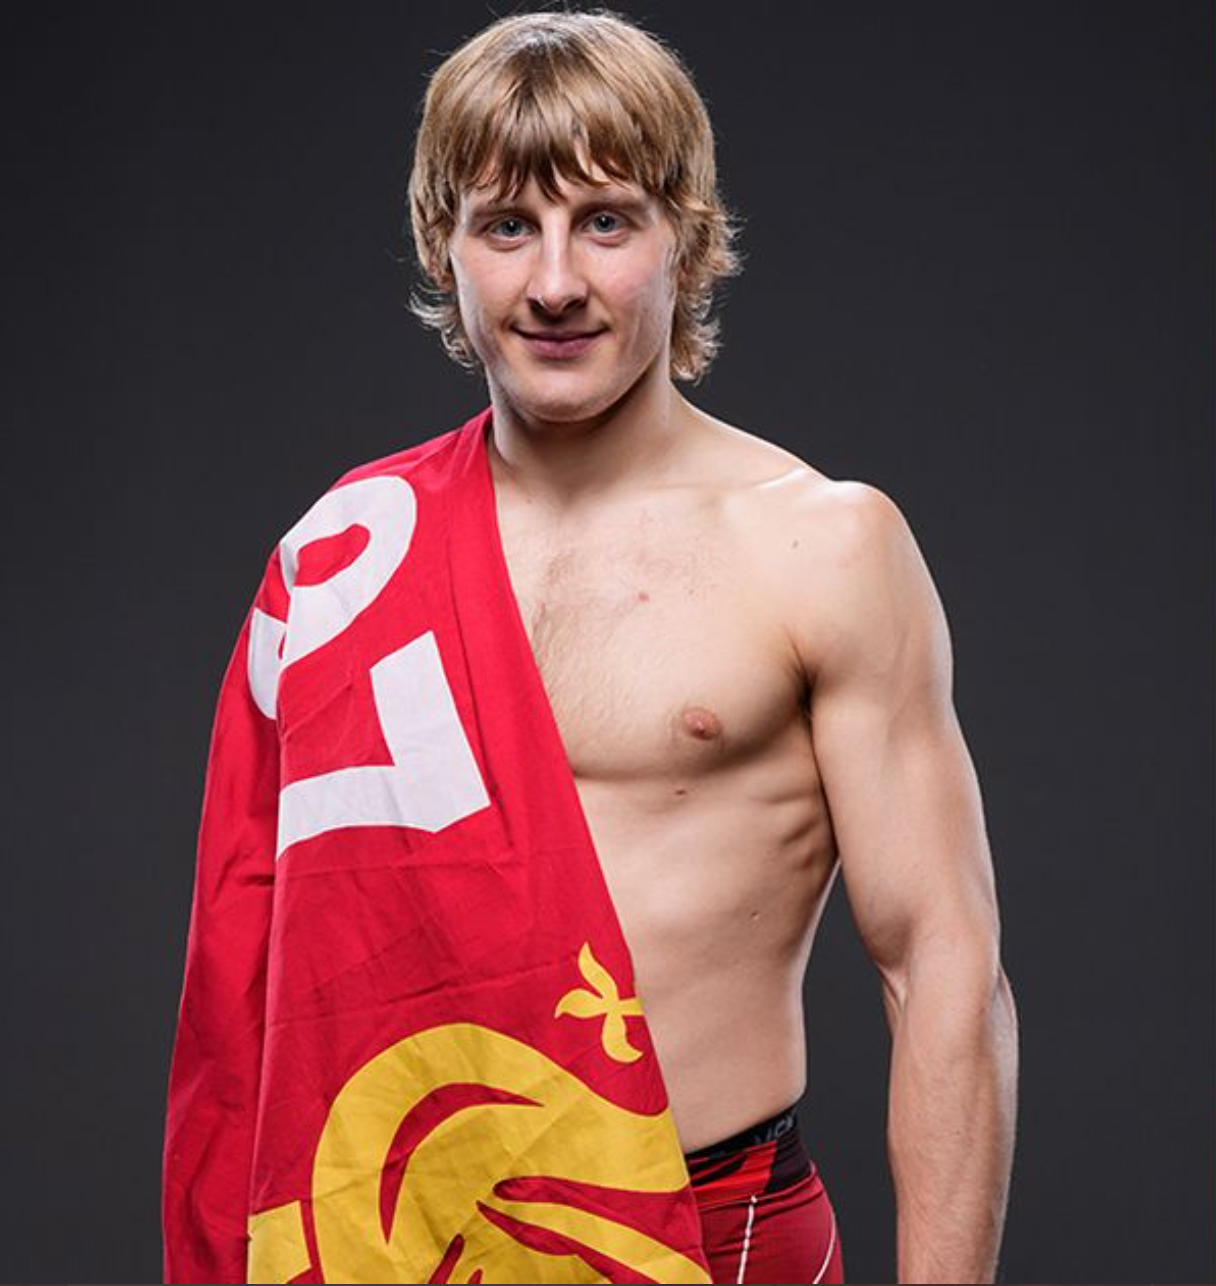 Qatar World Cup: UFC's Paddy Pimblett explains why he's not supporting England